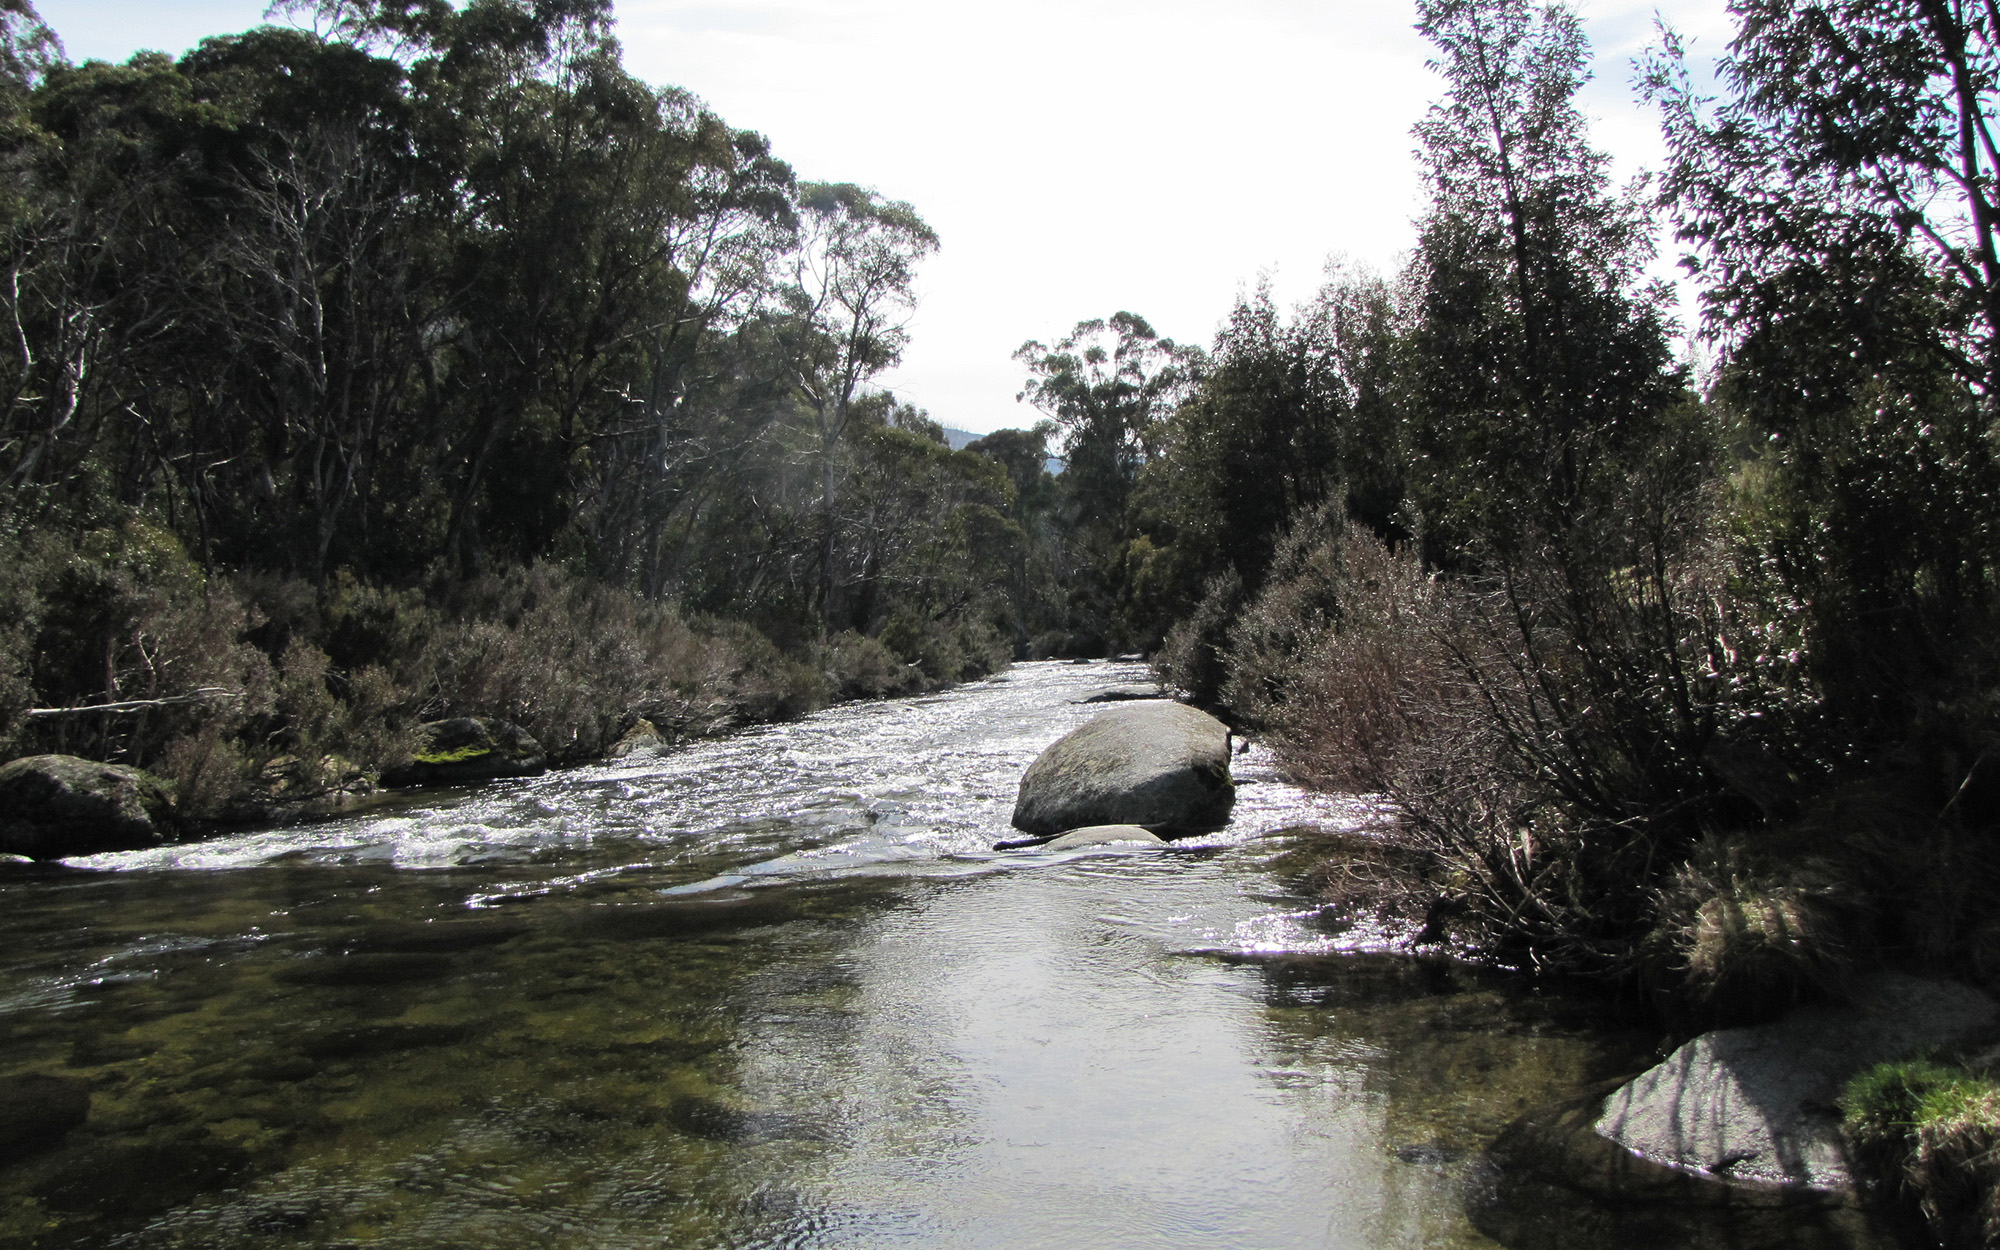 Snowy River flowing